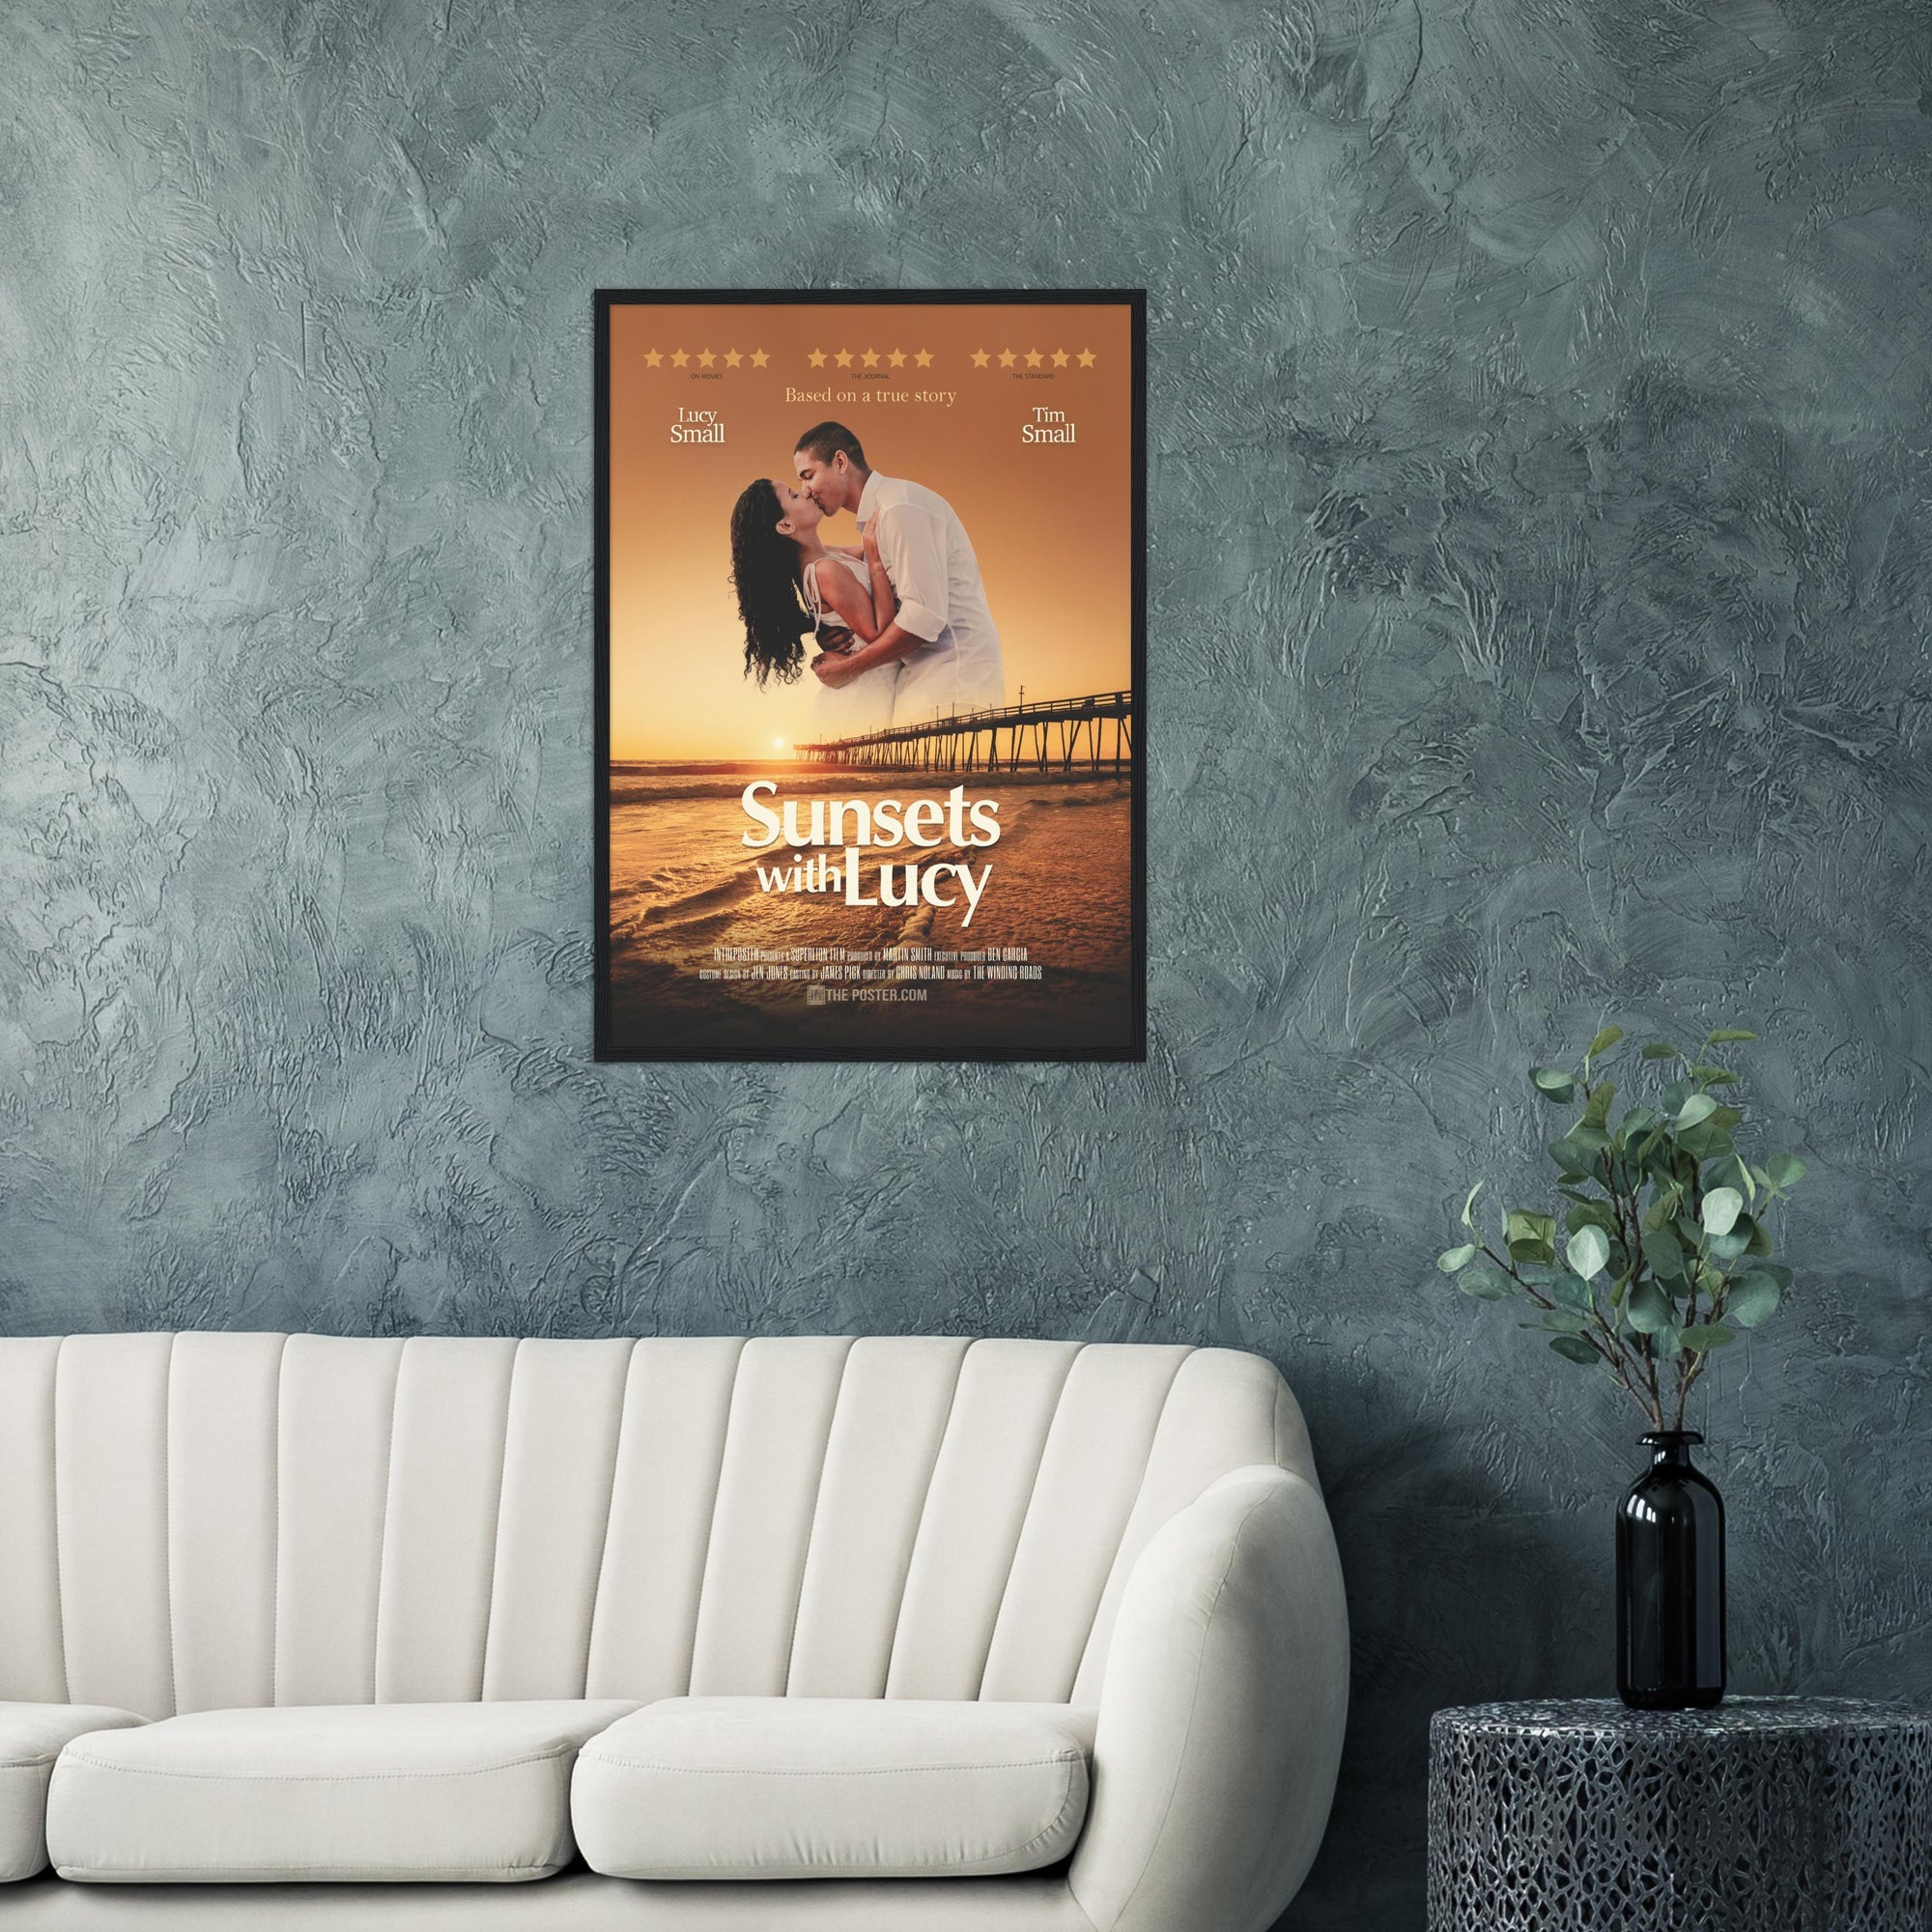 A custom movie poster in a regular sized black frame on the wall above a cream sofa